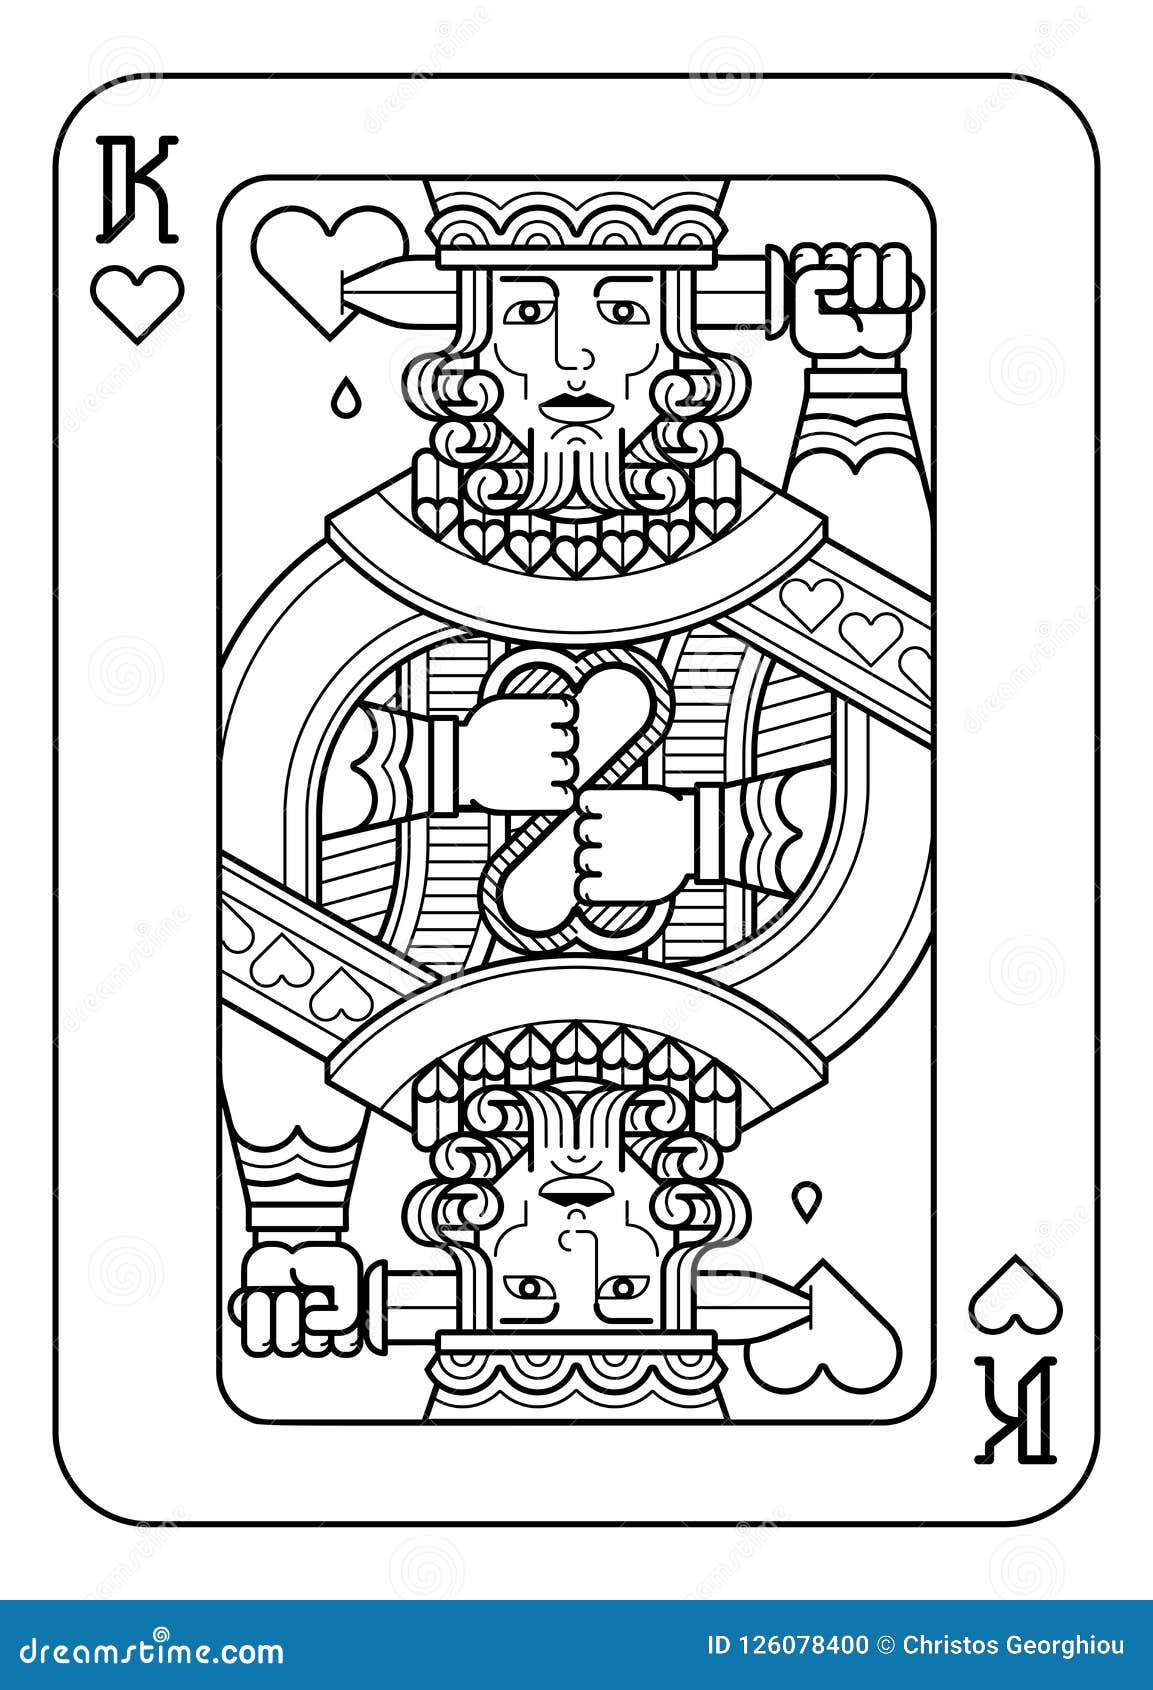 Playing Card King of Hearts Black and White Stock Vector - Illustration ...